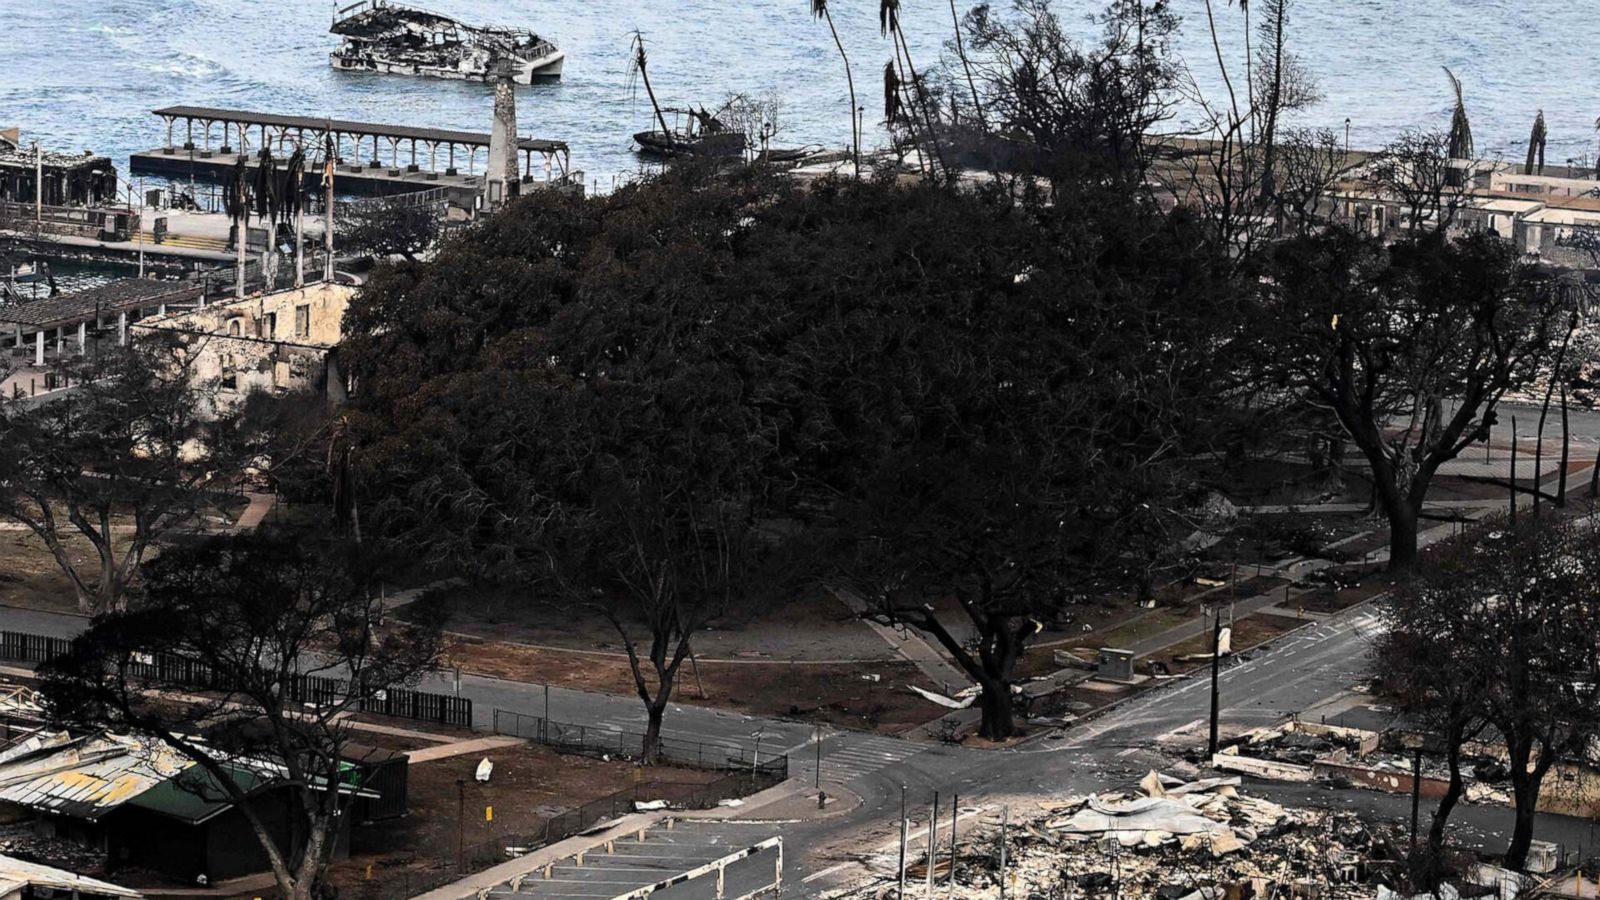 VIDEO: Lahaina’s beloved banyan tree offers hope amid recovery